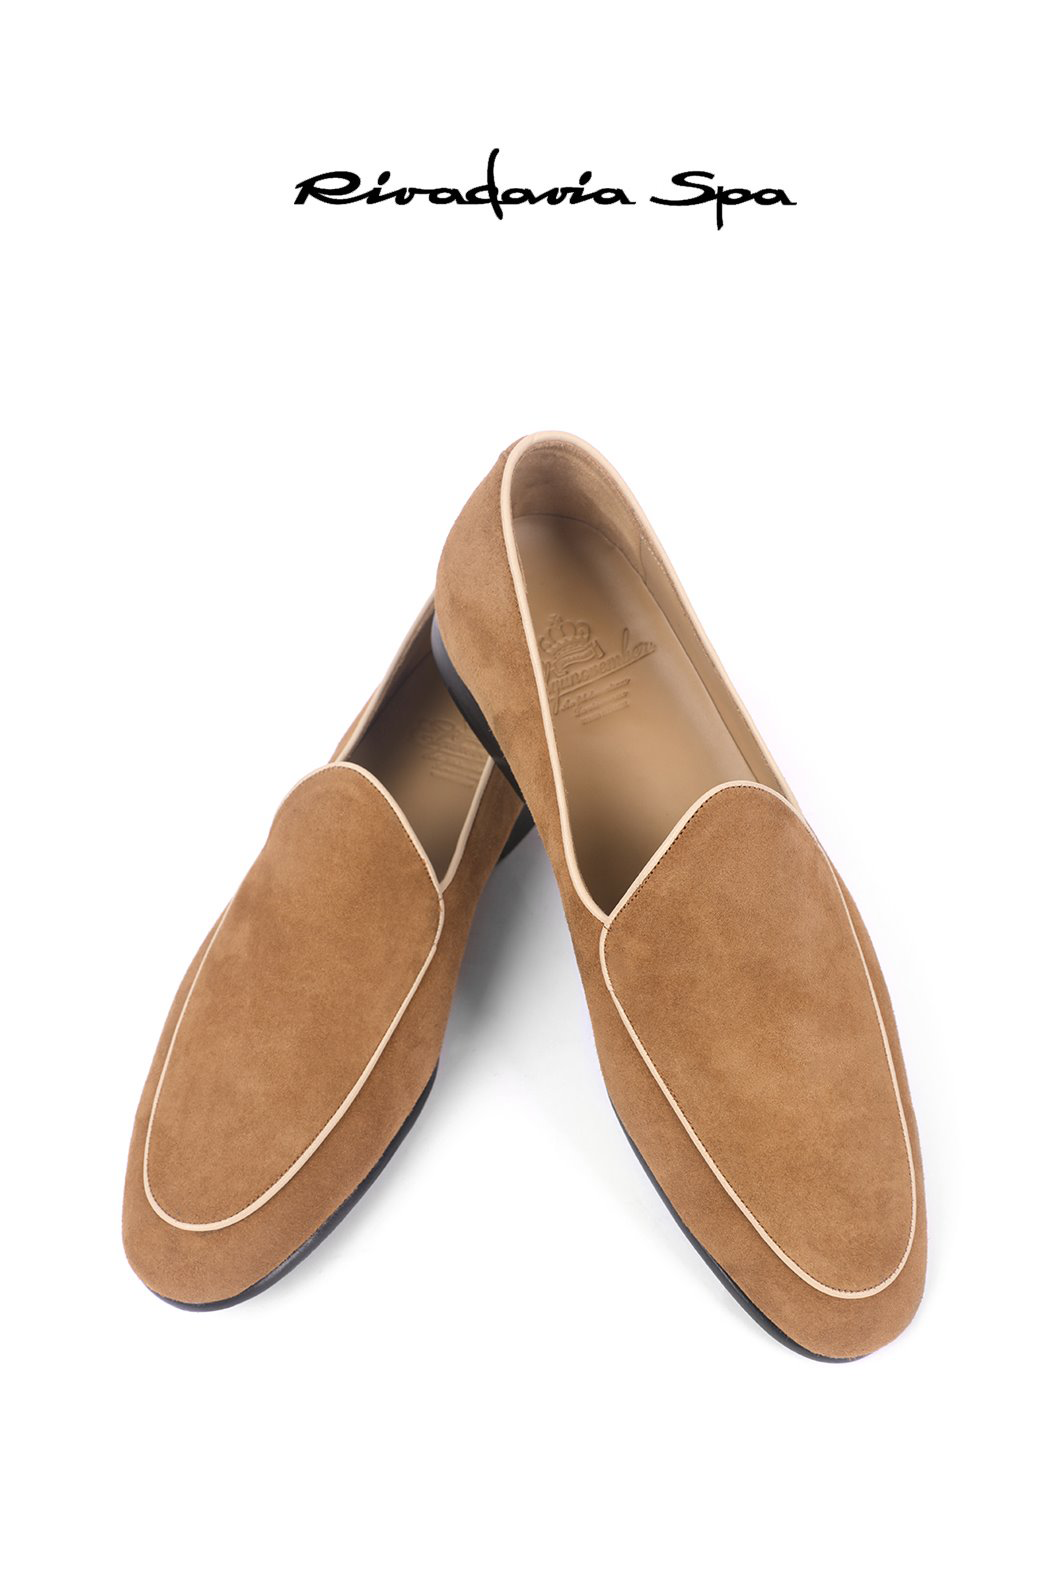 543  ITALY RIVADAVIA LOAFER-LIGHT BEIGE